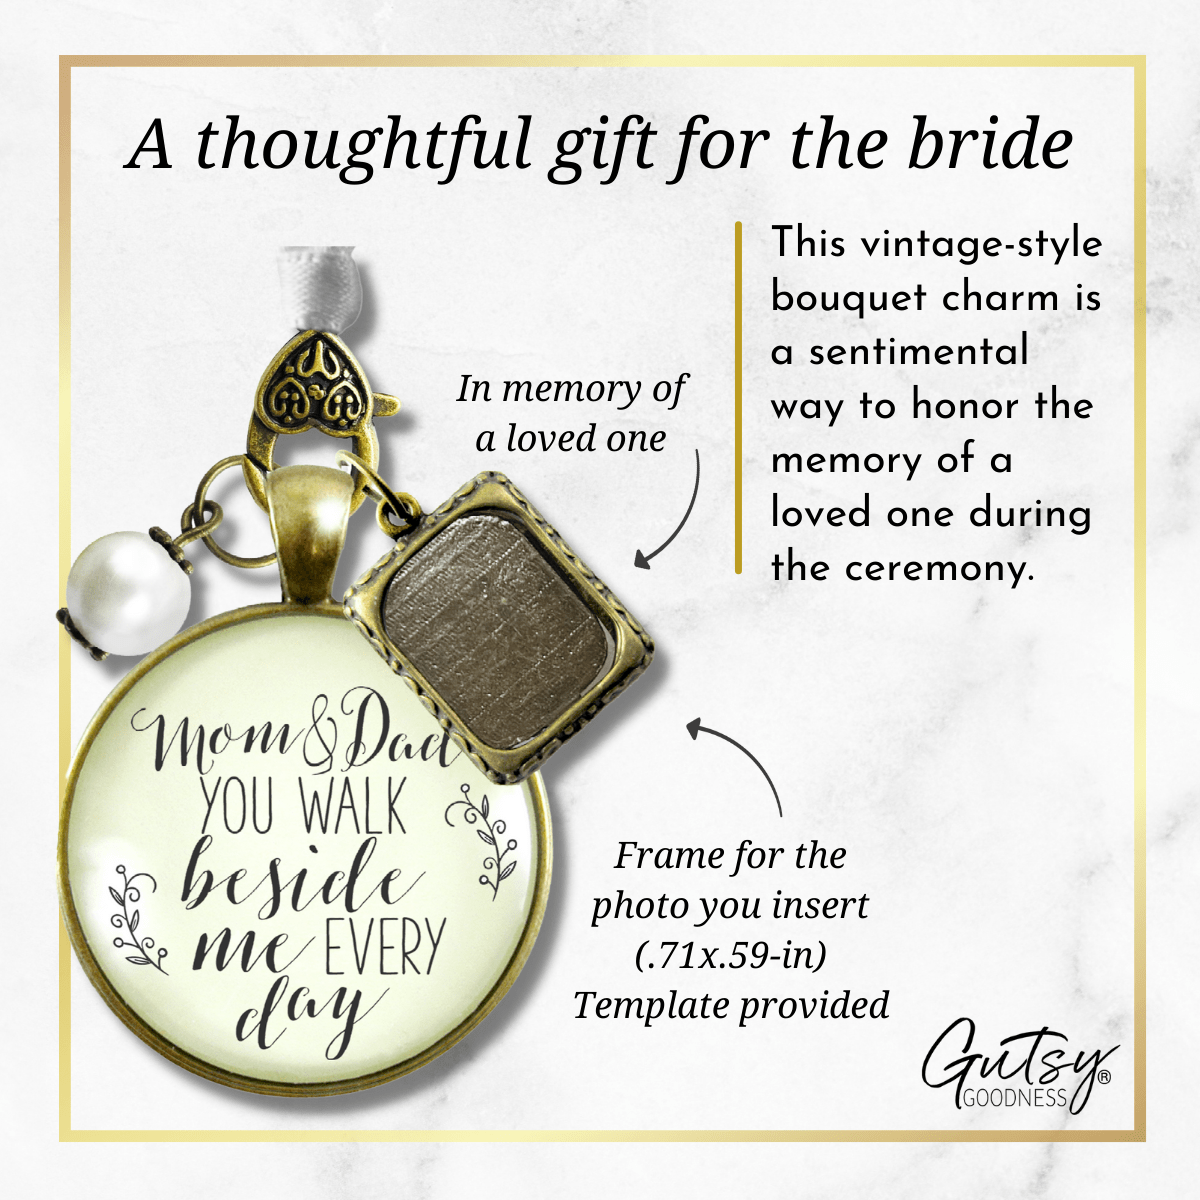 Bouquet Charm Mom Dad Remembrance Parent Of Bride Memory Photo Frame Wedding Memorial - Gutsy Goodness Handmade Jewelry Gifts